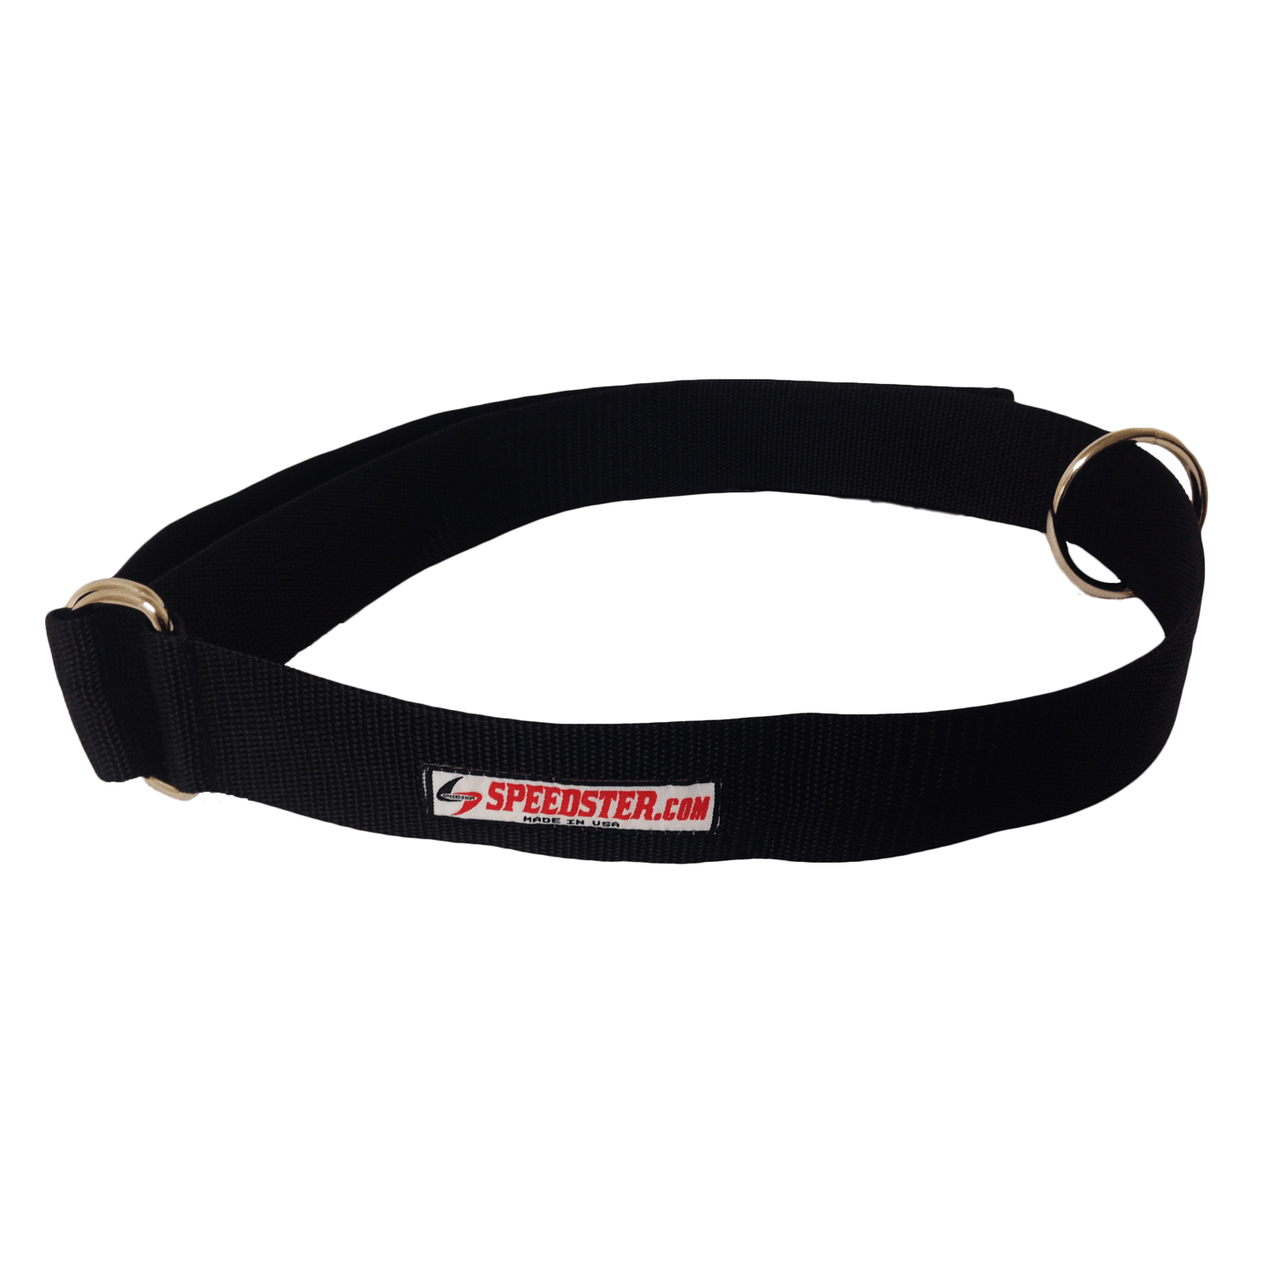 Heavy duty athlete training belt  adjustable for any athlete. Can be used for any sport including football baseball soccer, basketball, softball, rugby, hockey, volleyball and track. If you want a faster runner, quicker take off speed. Professional training gear quality at discounted prices 